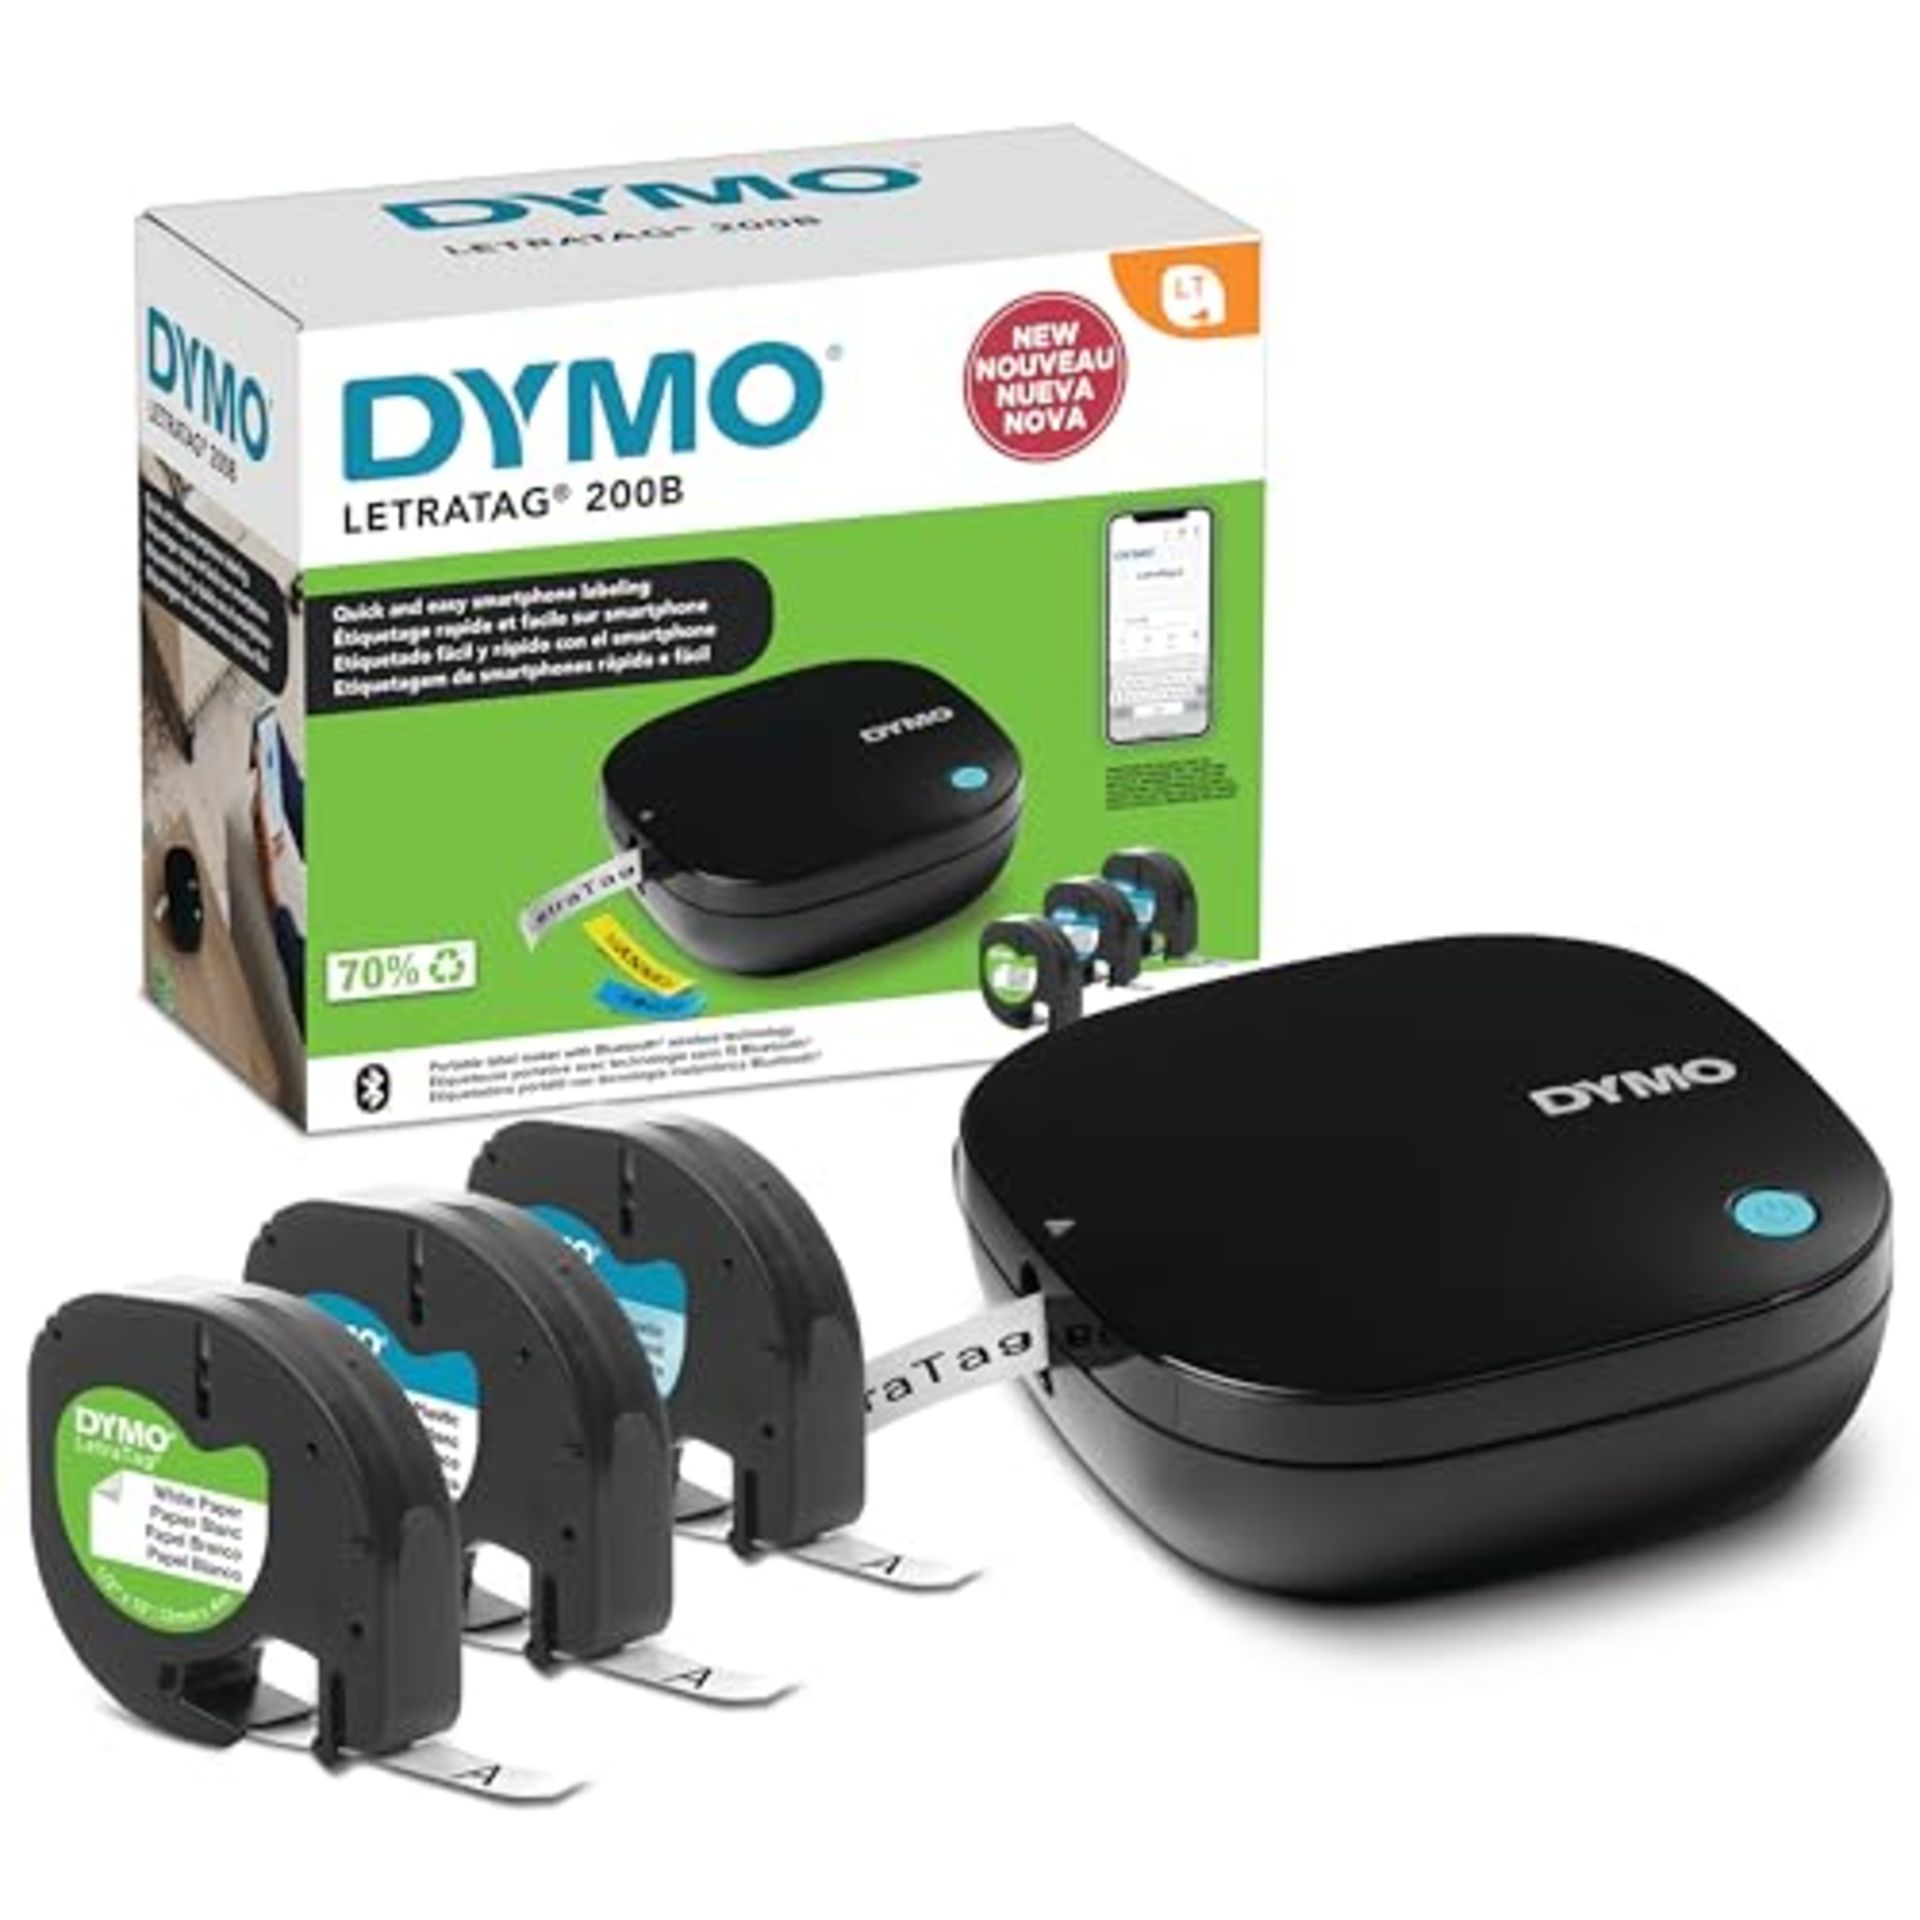 DYMO LetraTag 200B Bluetooth label maker - Compact label printer - Connects to iOS and